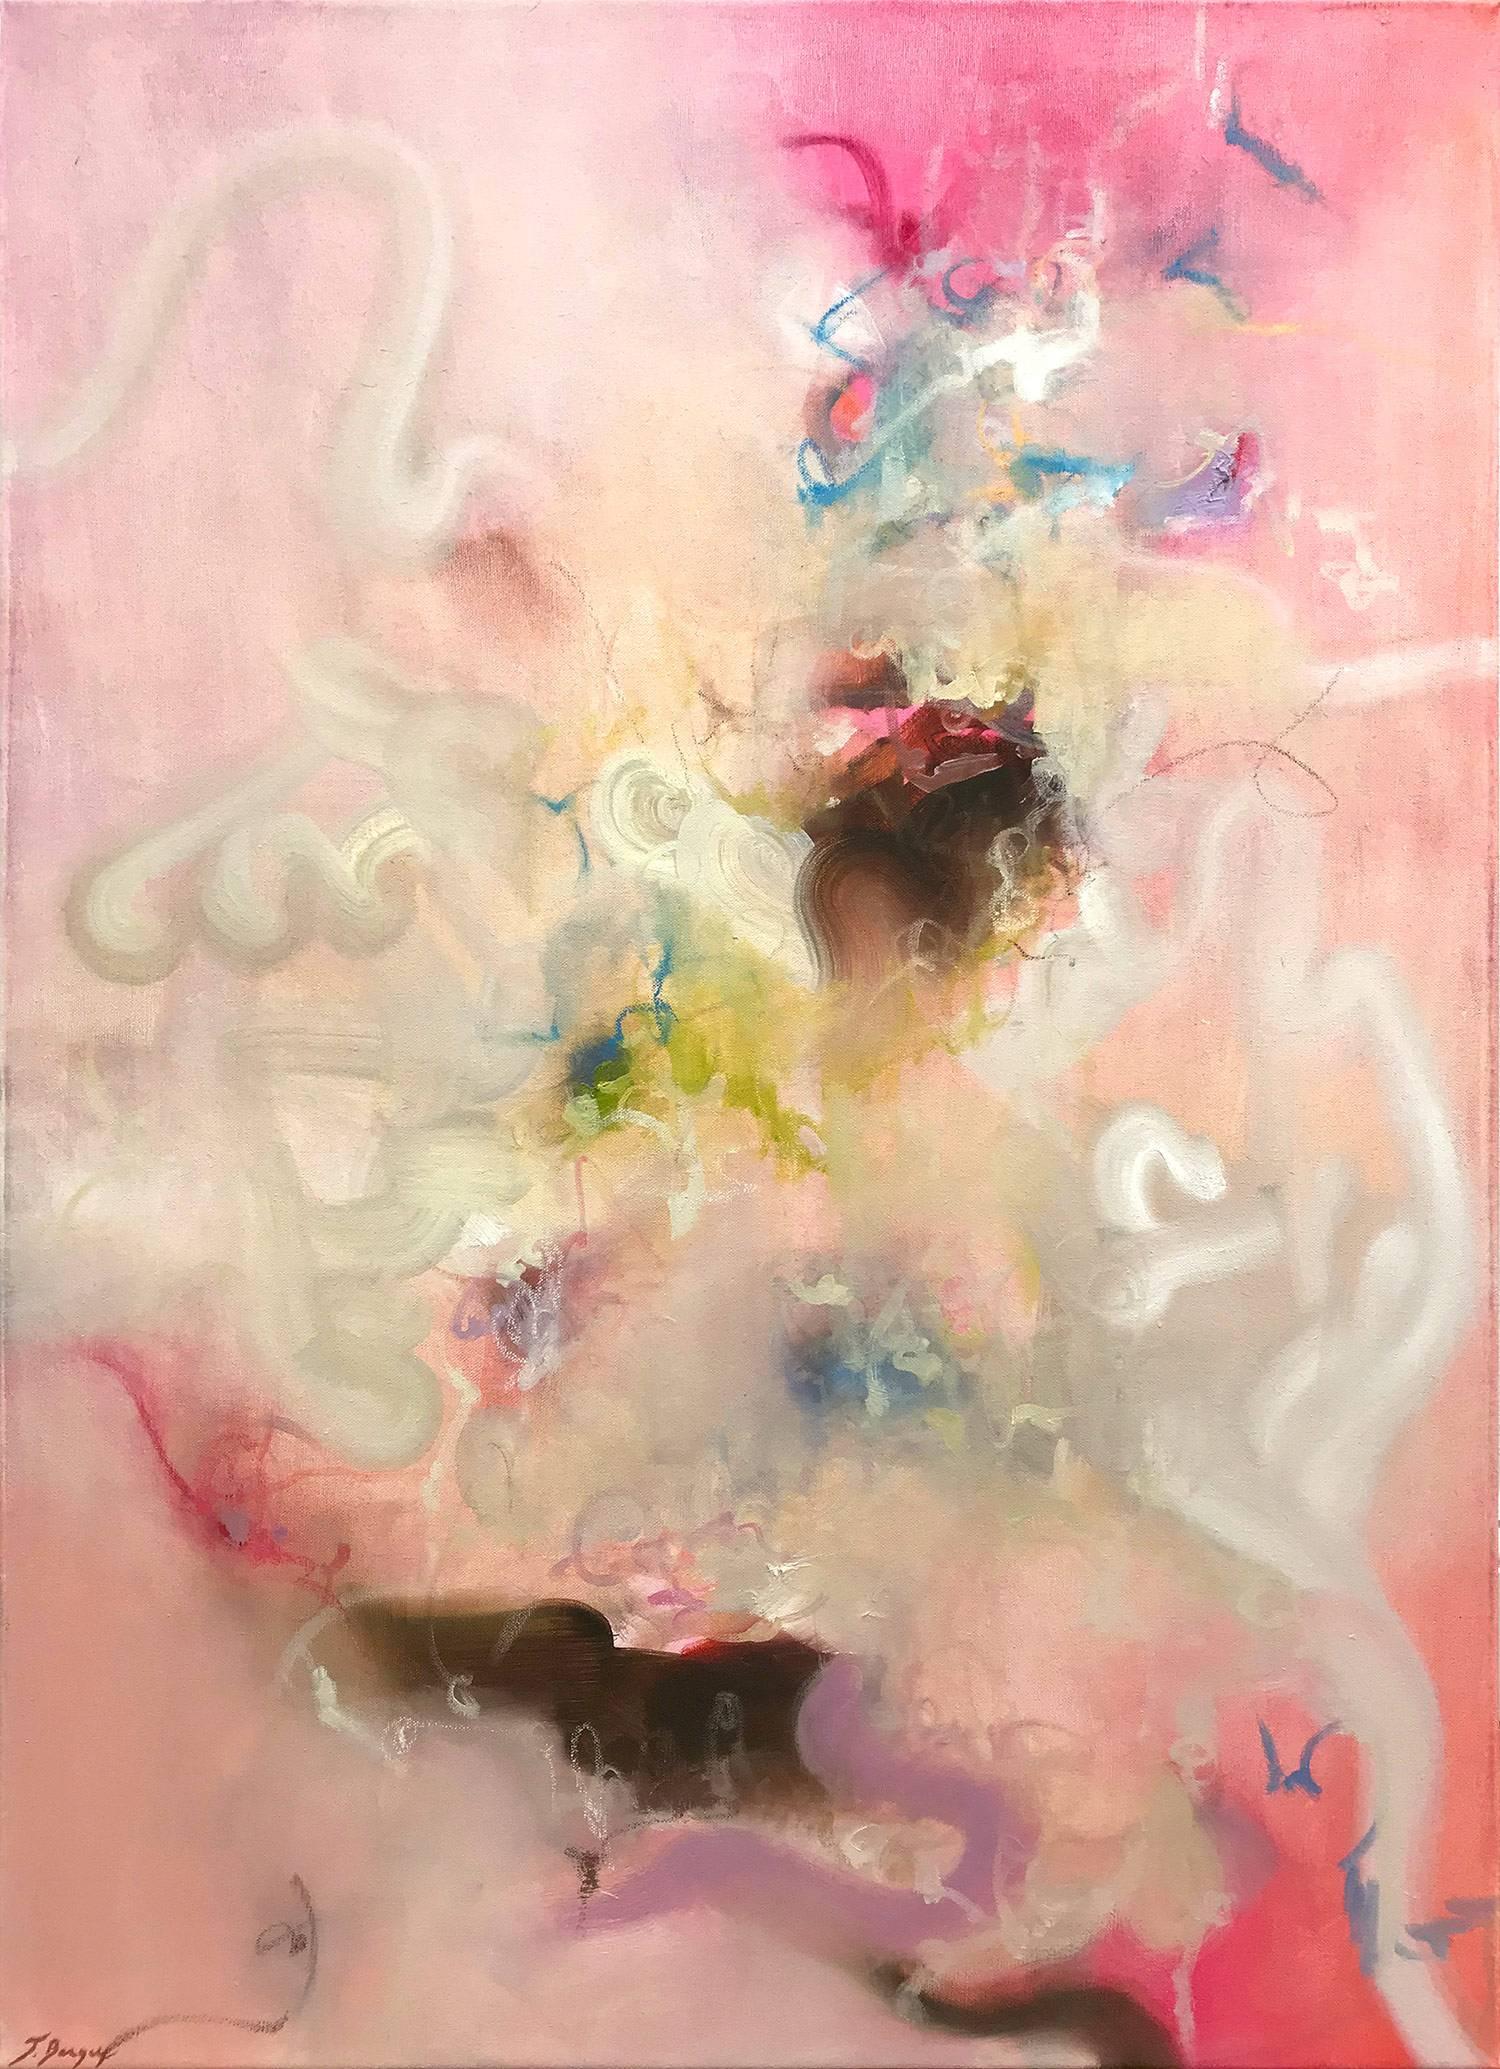 Tara Bergey Abstract Painting - "Transcendental" Contemporary Colorful Abstract Oil Painting on Gallery Canvas